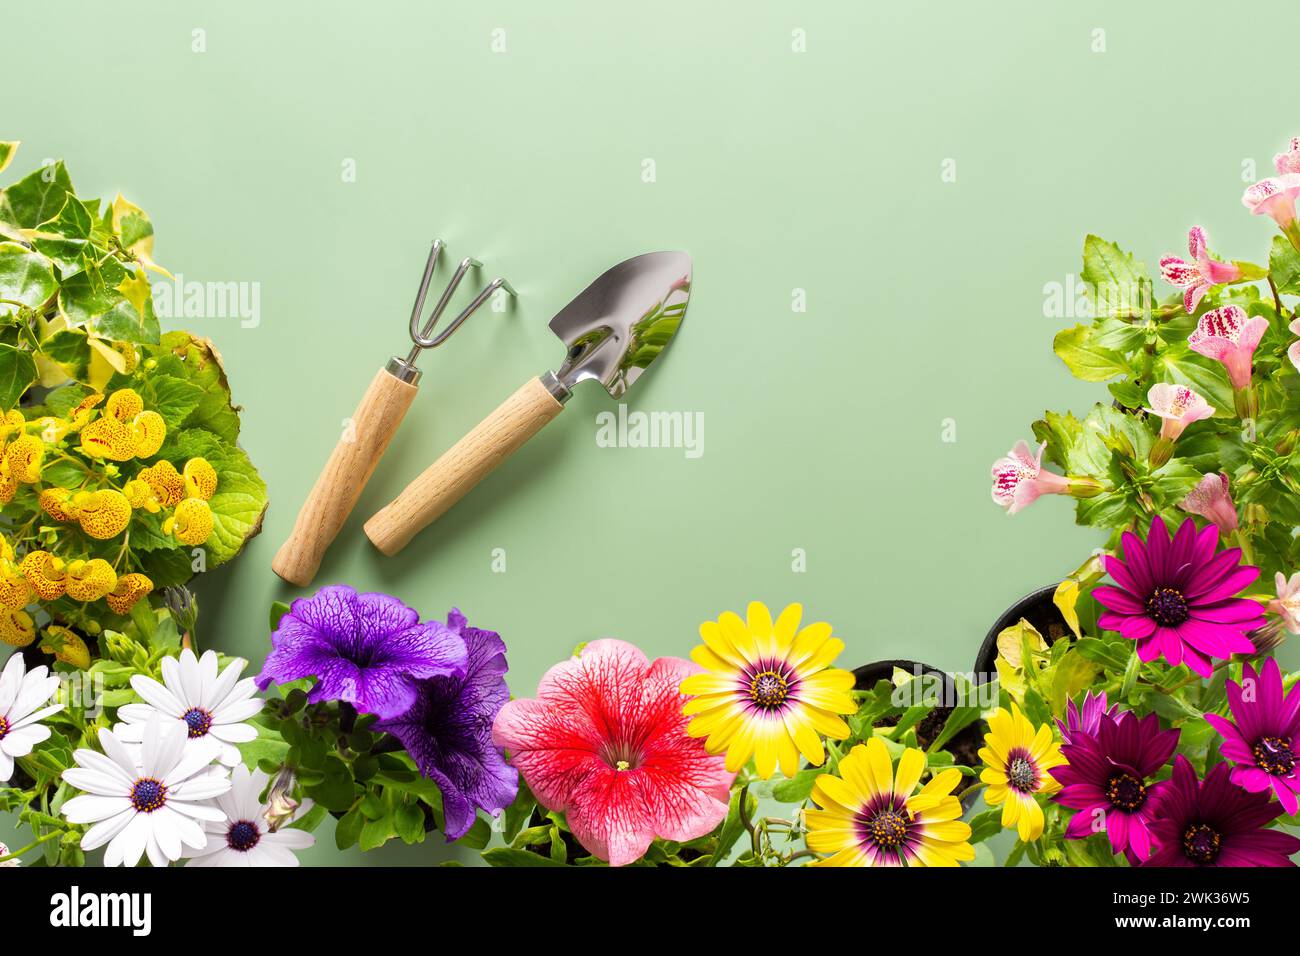 Spring decoration of a home balcony or terrace with flowers, Osteospermum and Calceolaria, Mimulus and Petunia on a green background, home gardening and hobbies, biophilic design Stock Photo